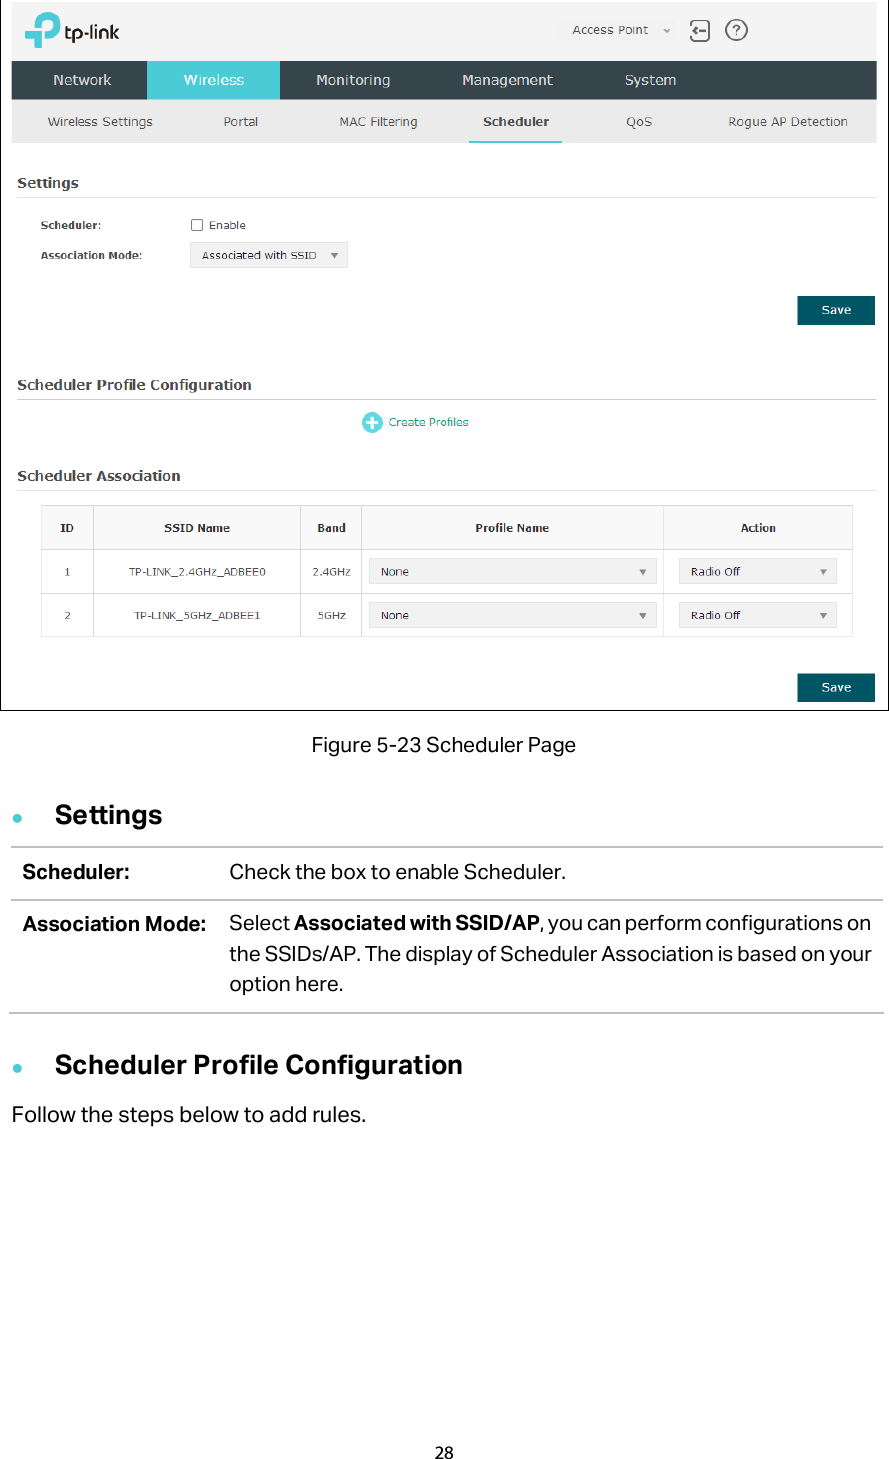  Figure 5-23 Scheduler Page  Settings Scheduler: Check the box to enable Scheduler. Association Mode: Select Associated with SSID/AP, you can perform configurations on the SSIDs/AP. The display of Scheduler Association is based on your option here.    Scheduler Profile Configuration Follow the steps below to add rules. 28  